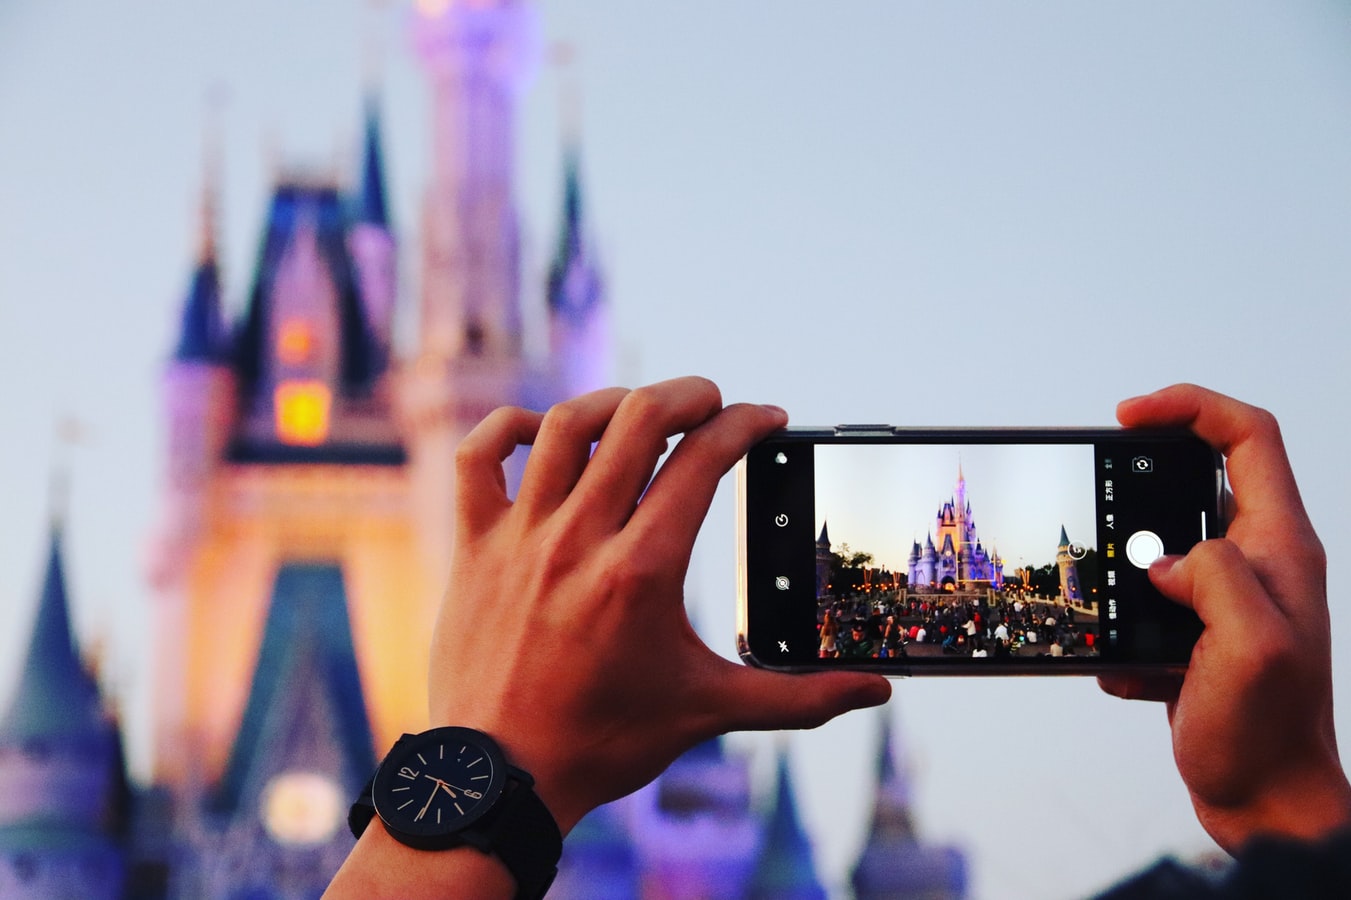 Disney as an example of exceptional customer experiences, personalized interactions, emotional loyalty, innovation and perfect employee development